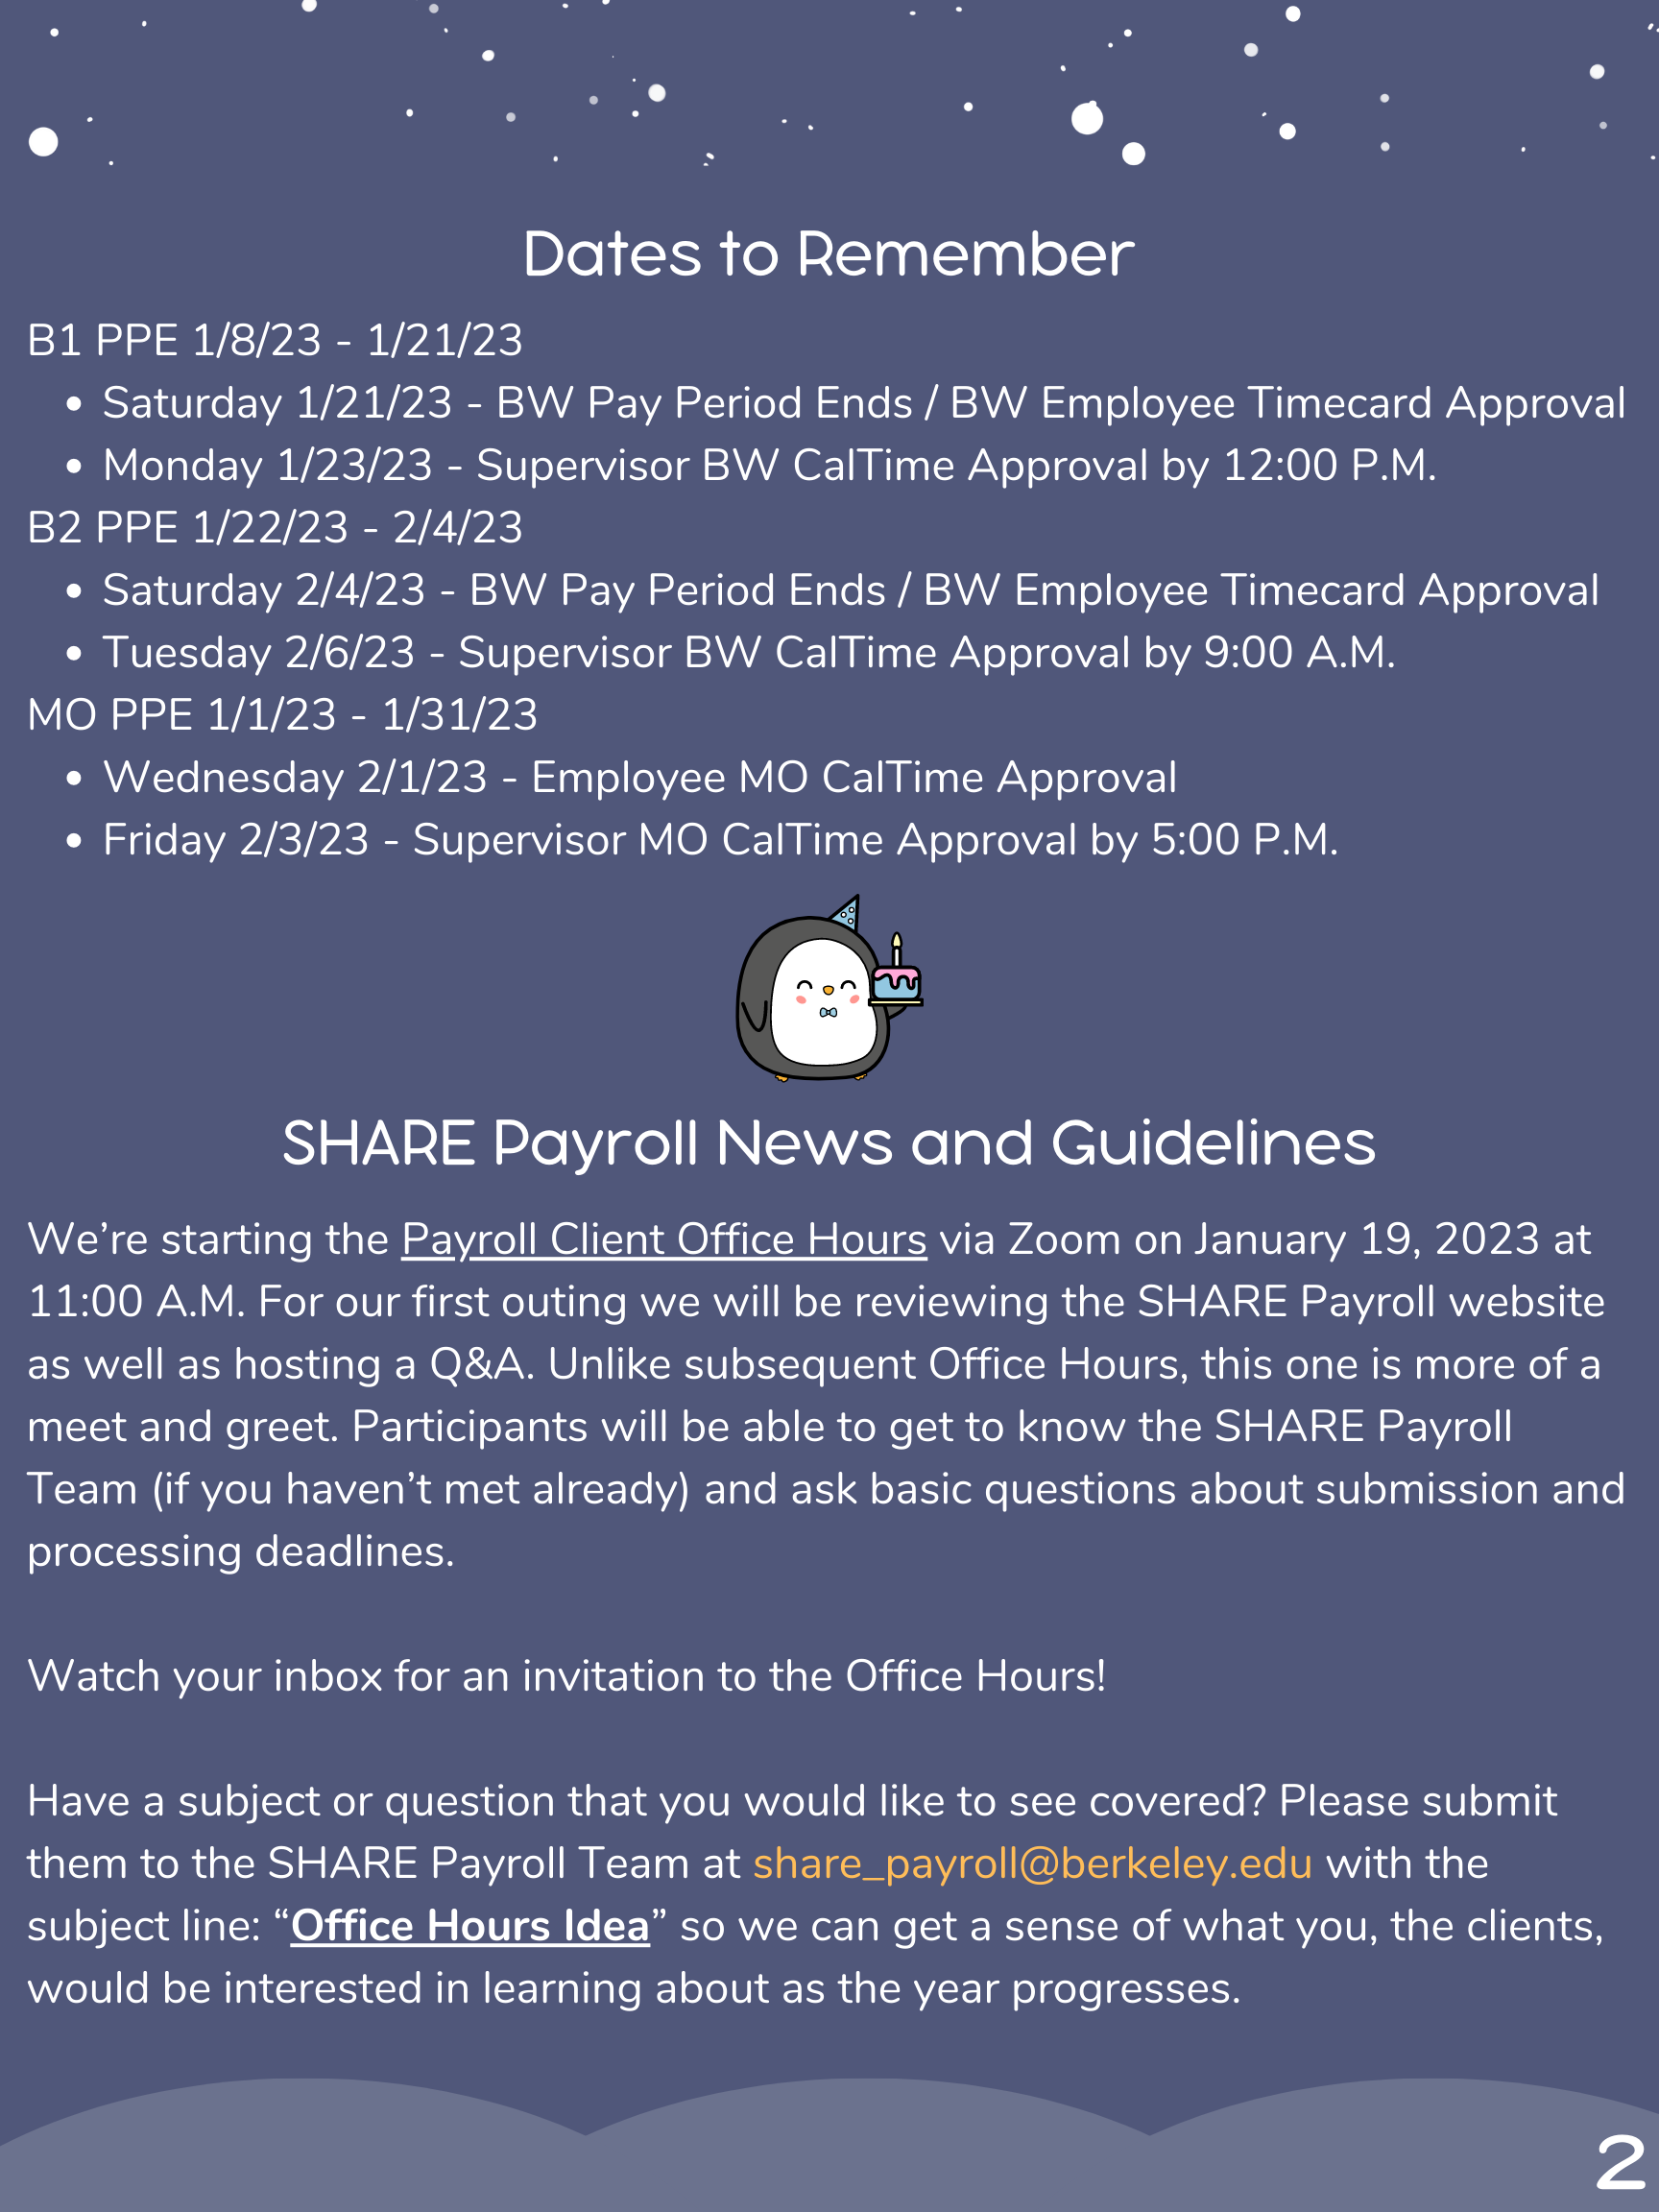 SHARE Payroll guidelines and dates to remember are all available on the SHARE Payroll website on the Client Facing Calendar at the bottom of the page.